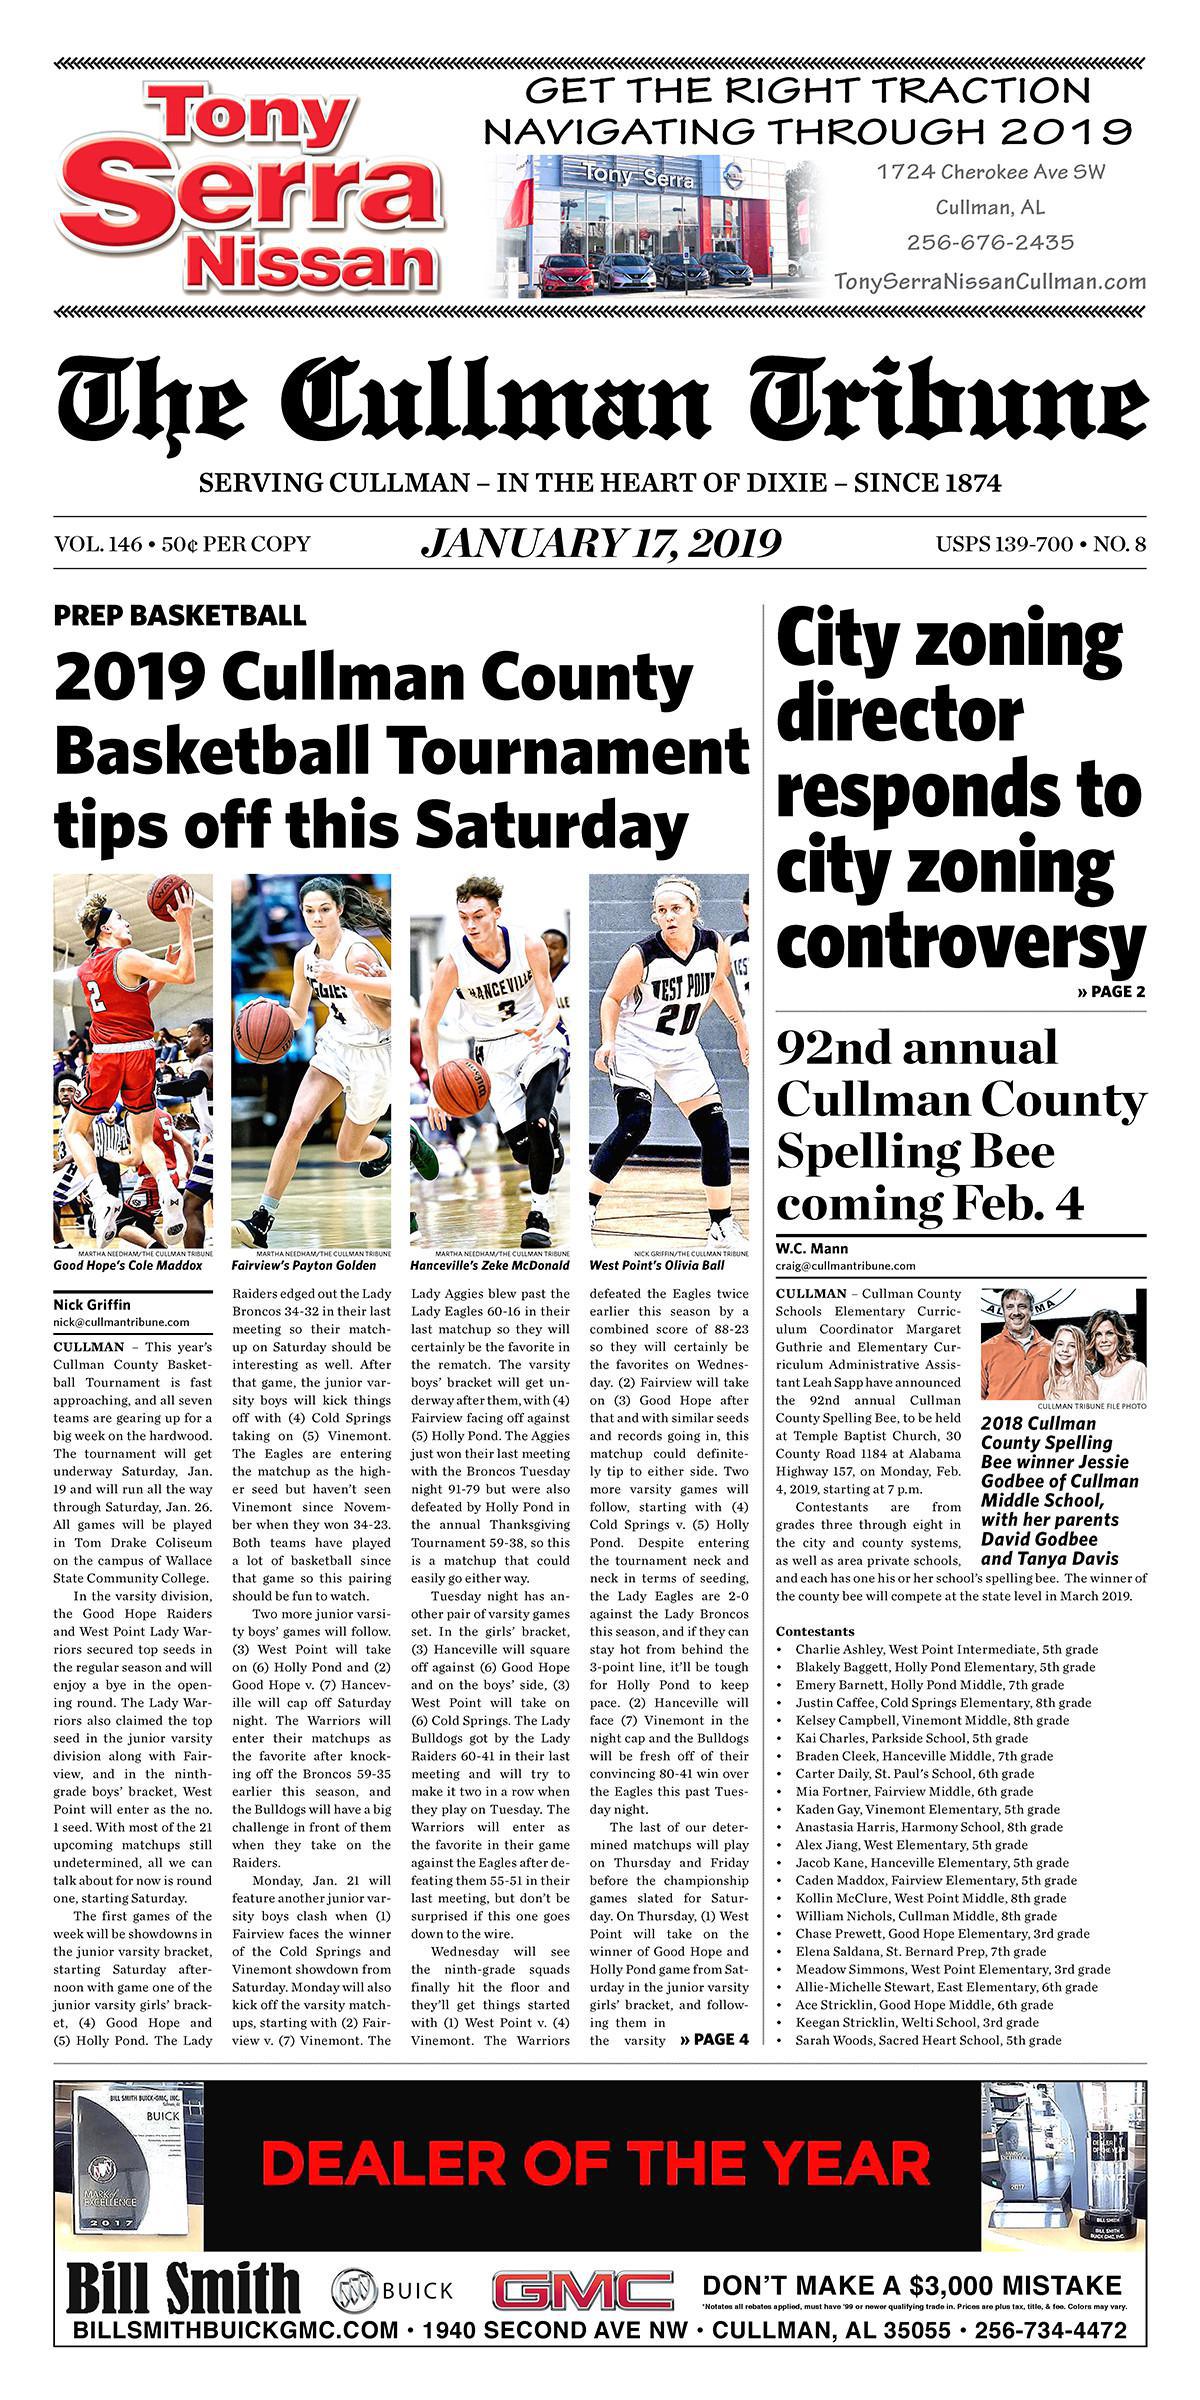 Good Morning Cullman! The 01-17-2019 edition of the Cullman Tribune is now ready to view